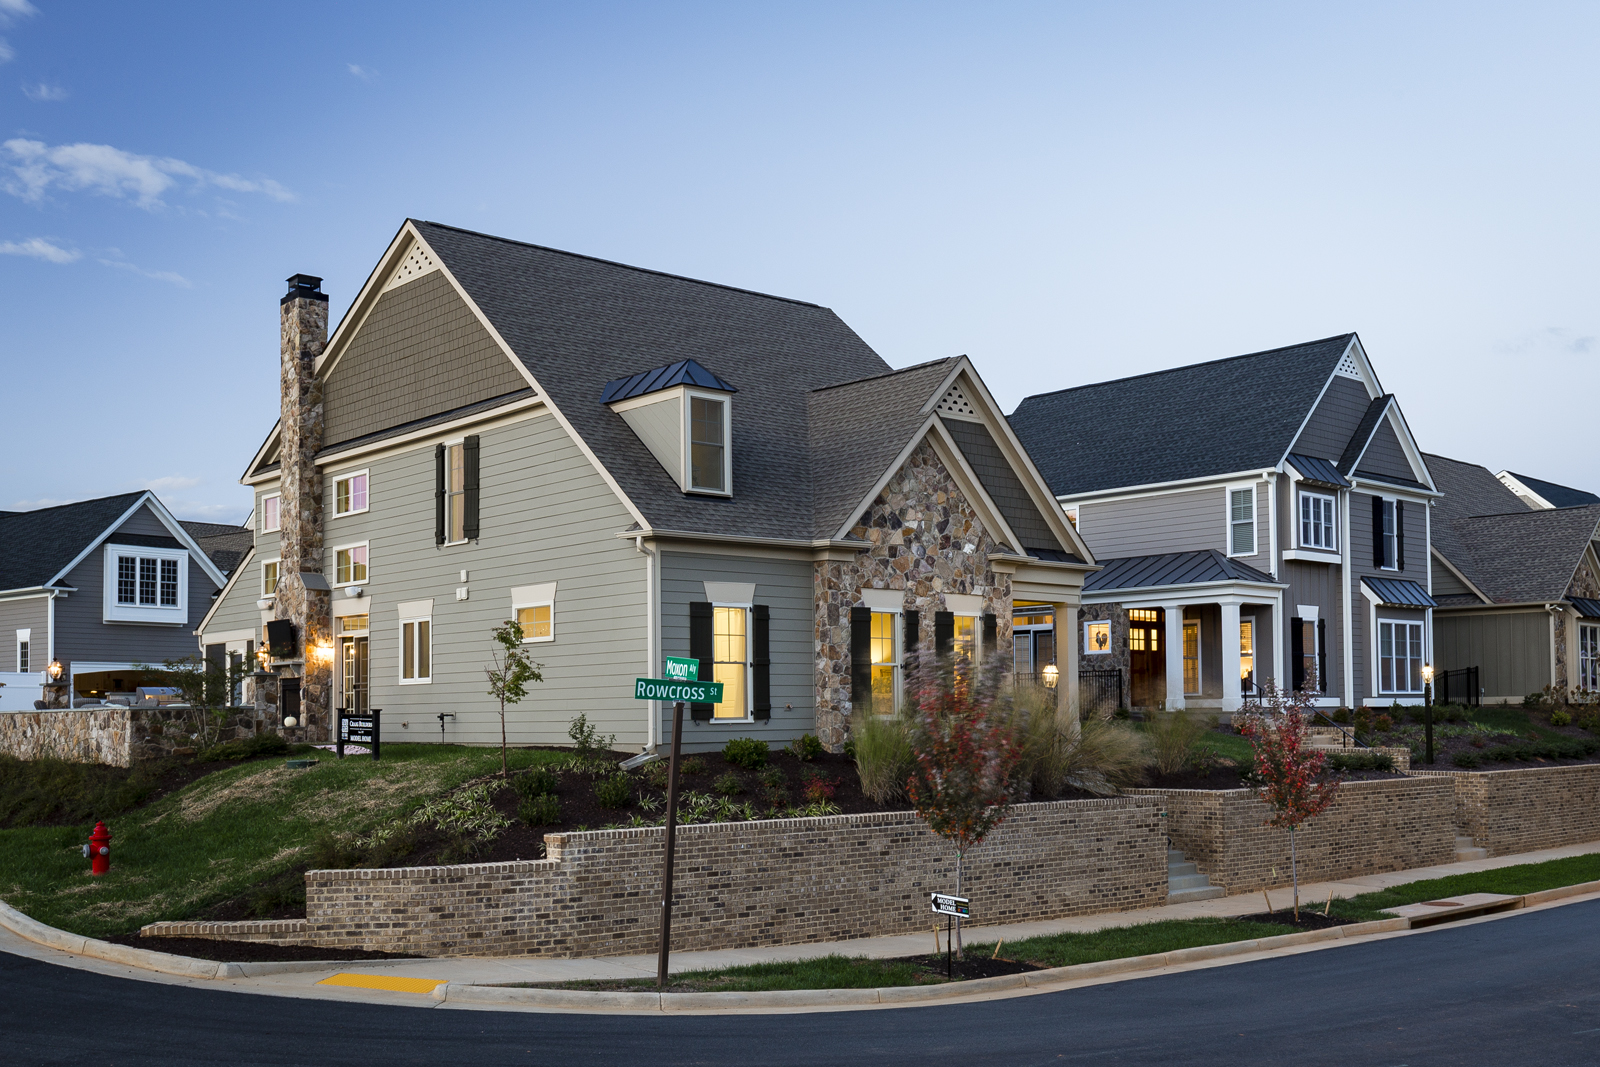 Exterior of Craig Builders model home in Old Trail Village